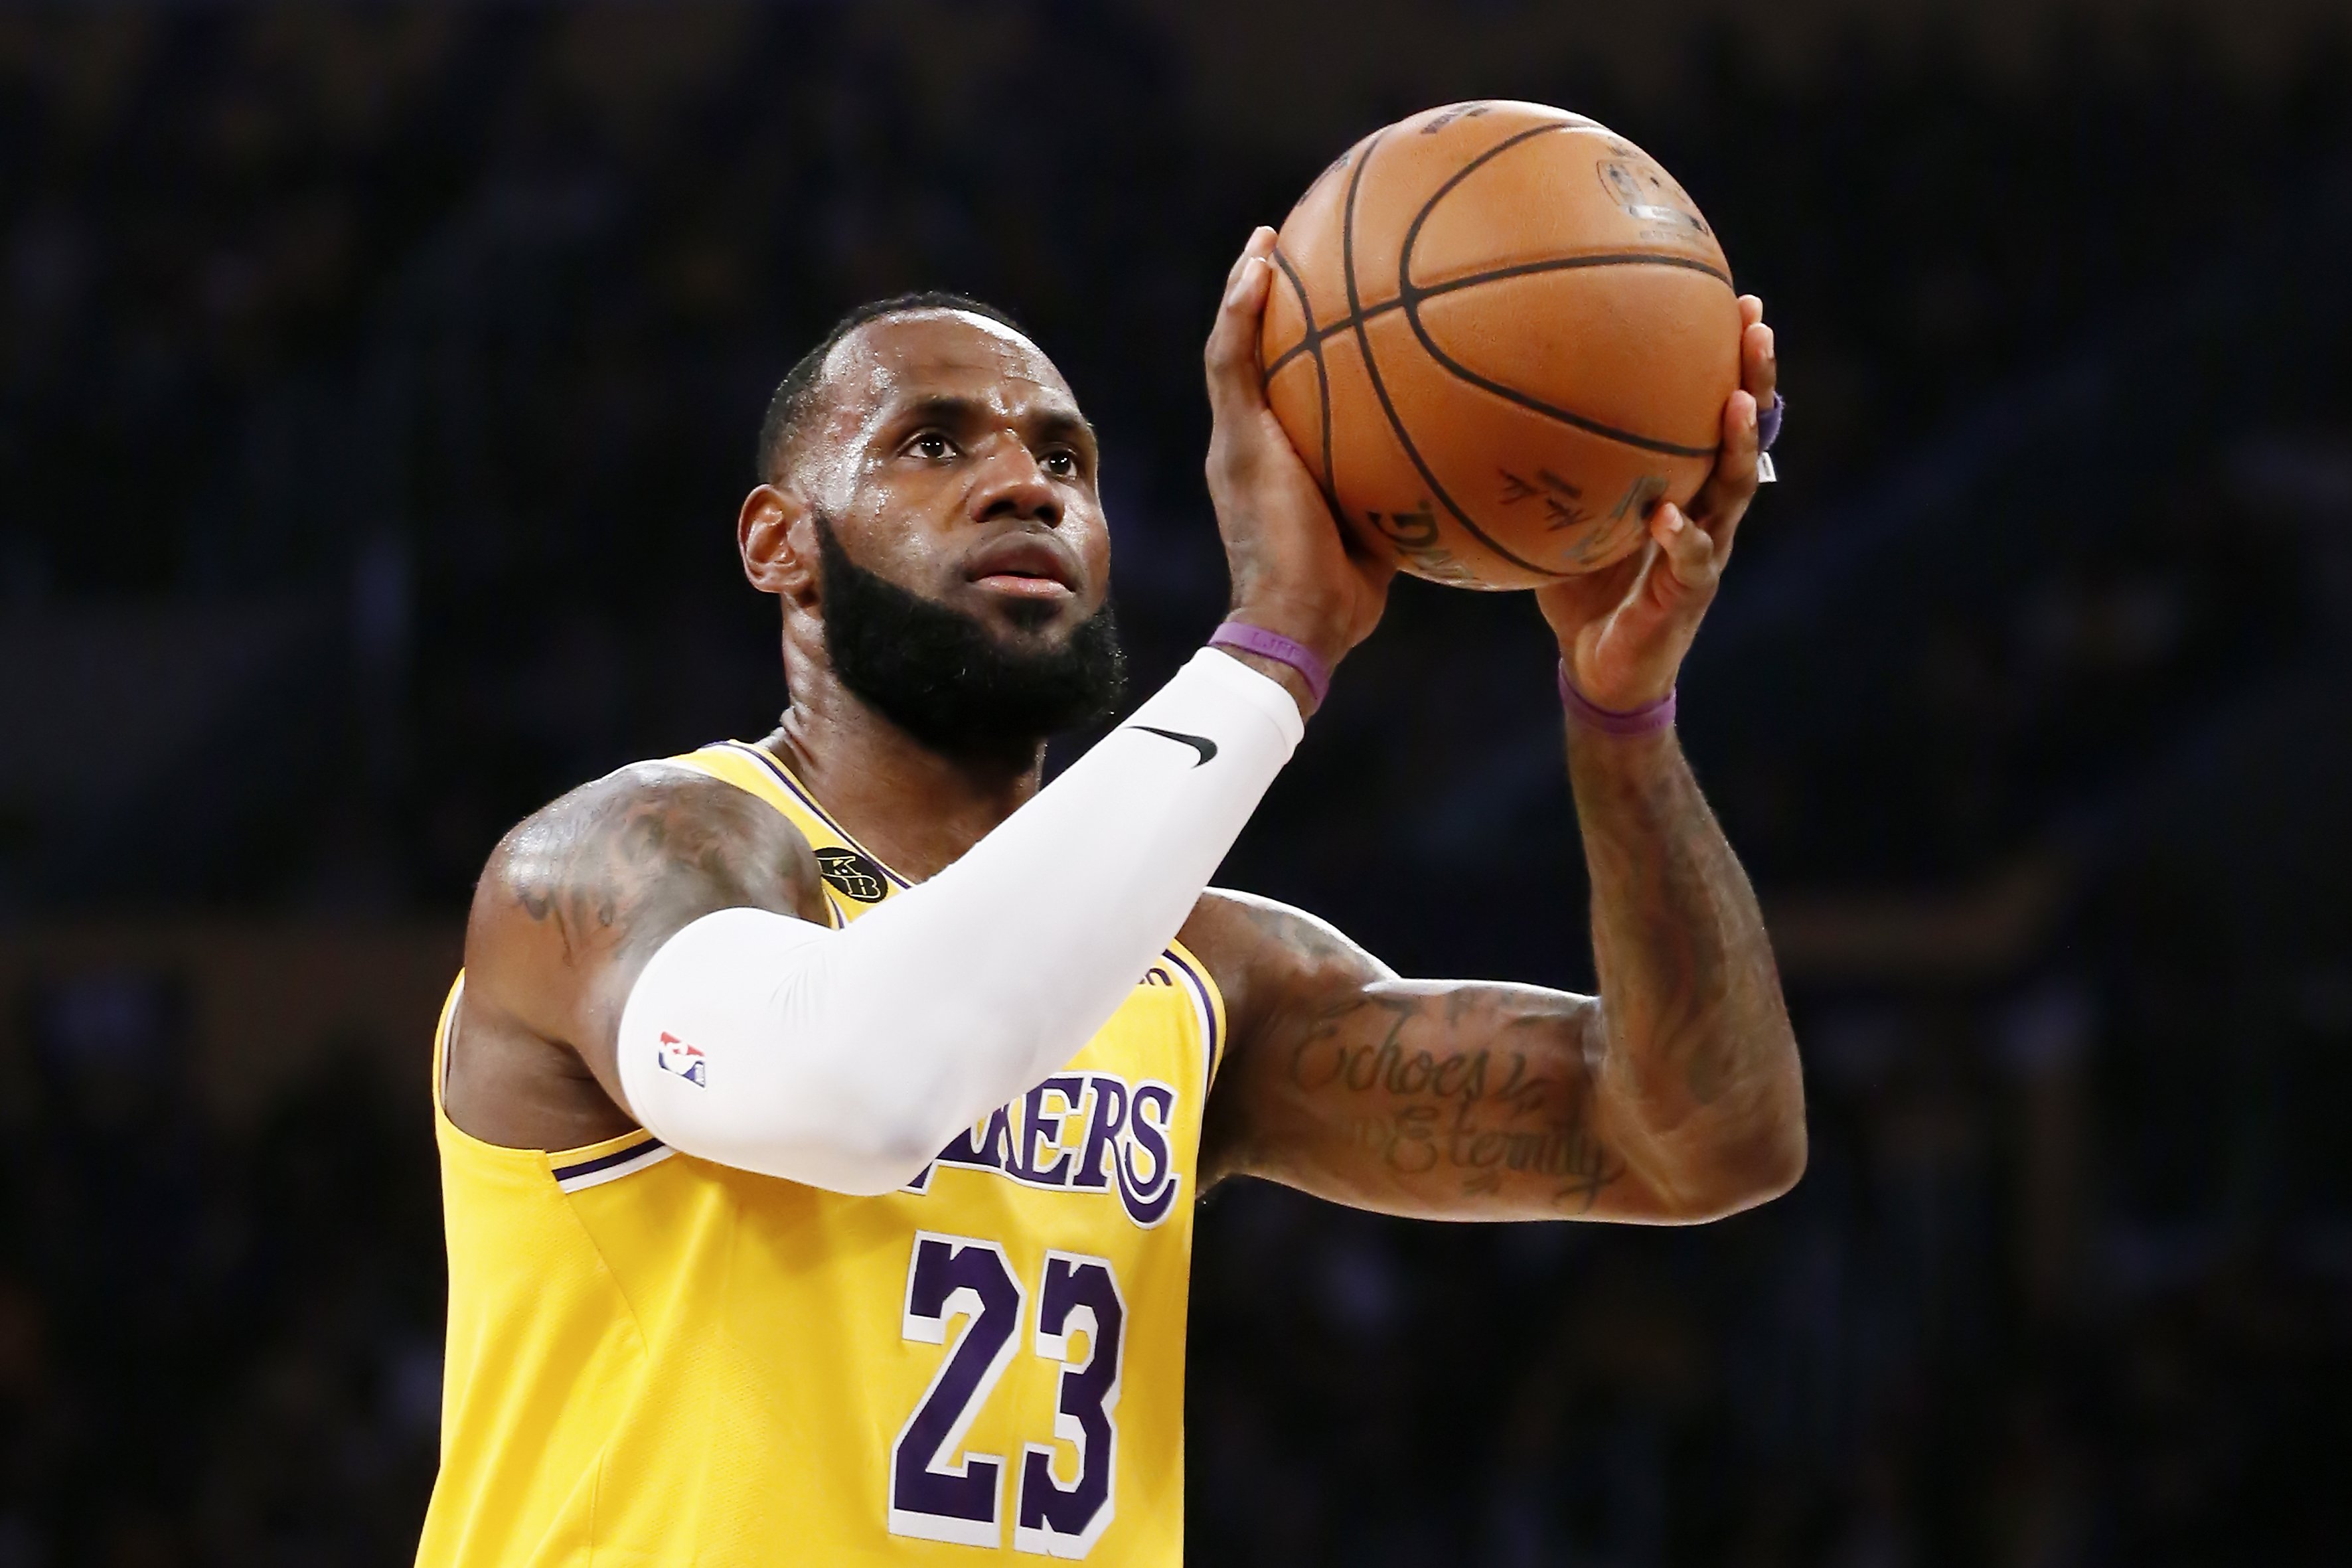 LeBron James during a game against the Brooklyn Nets at the Staples Center on March 10, 2020 in Los Angeles. | Source: Getty Images